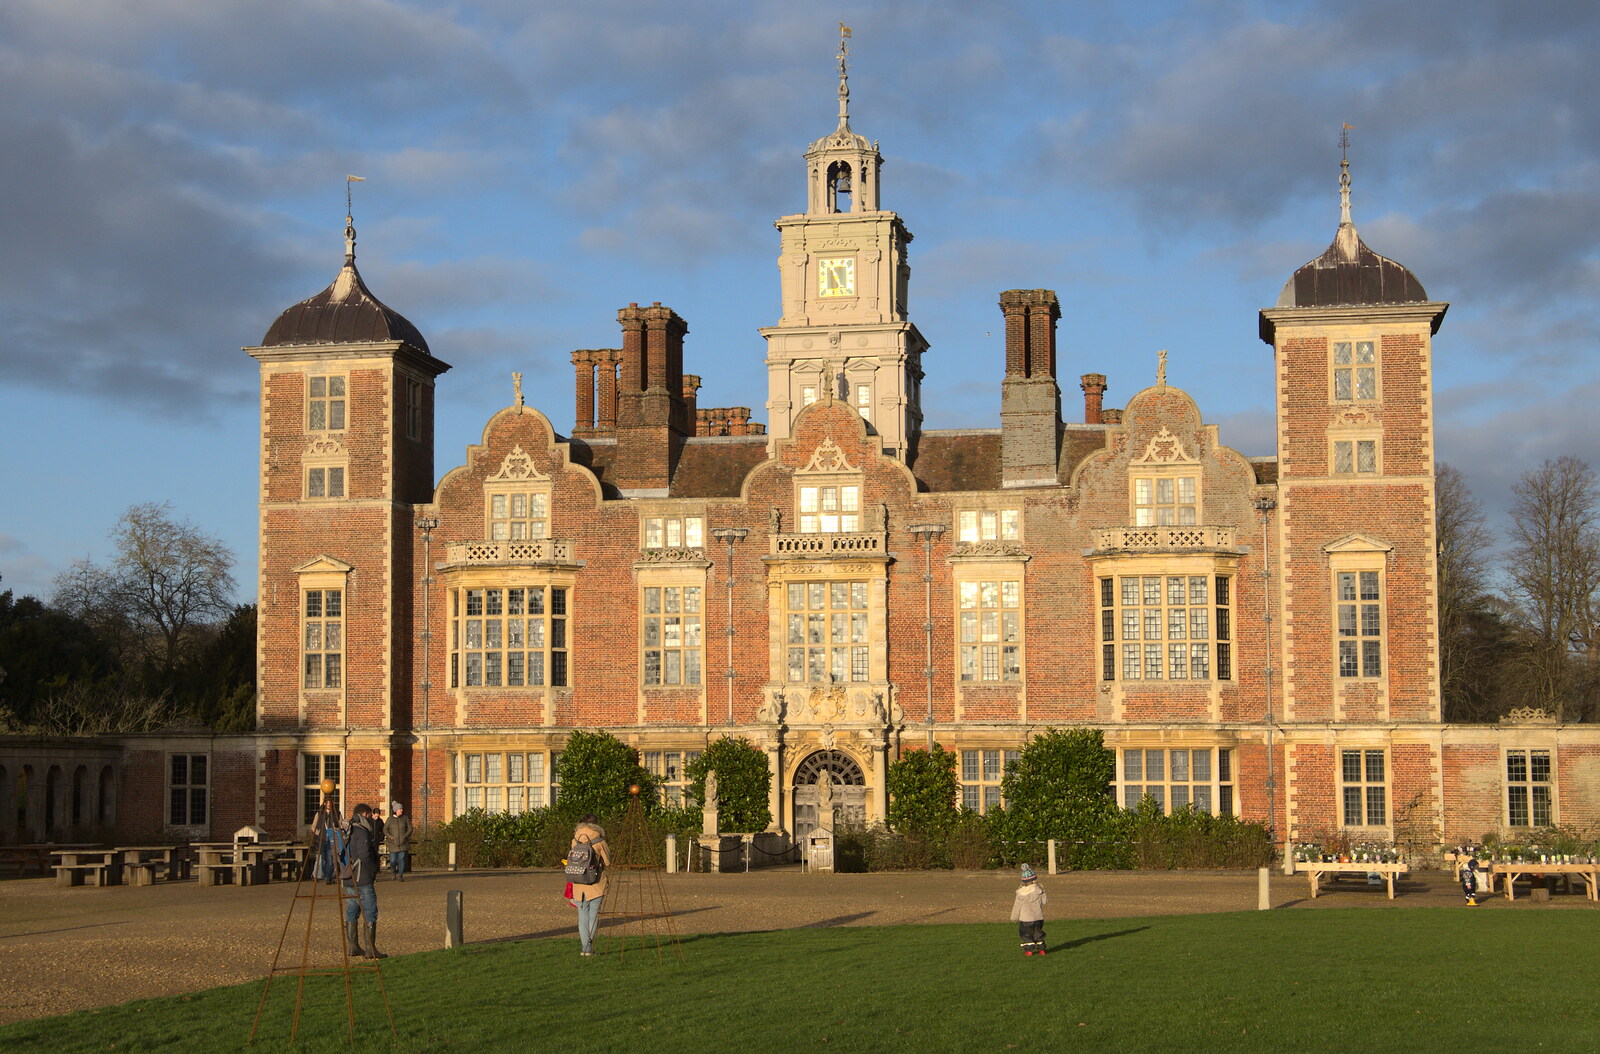 Blickling Hall in the low golden evening sun from A Visit to Blickling Hall, Aylsham, Norfolk - 9th January 2022